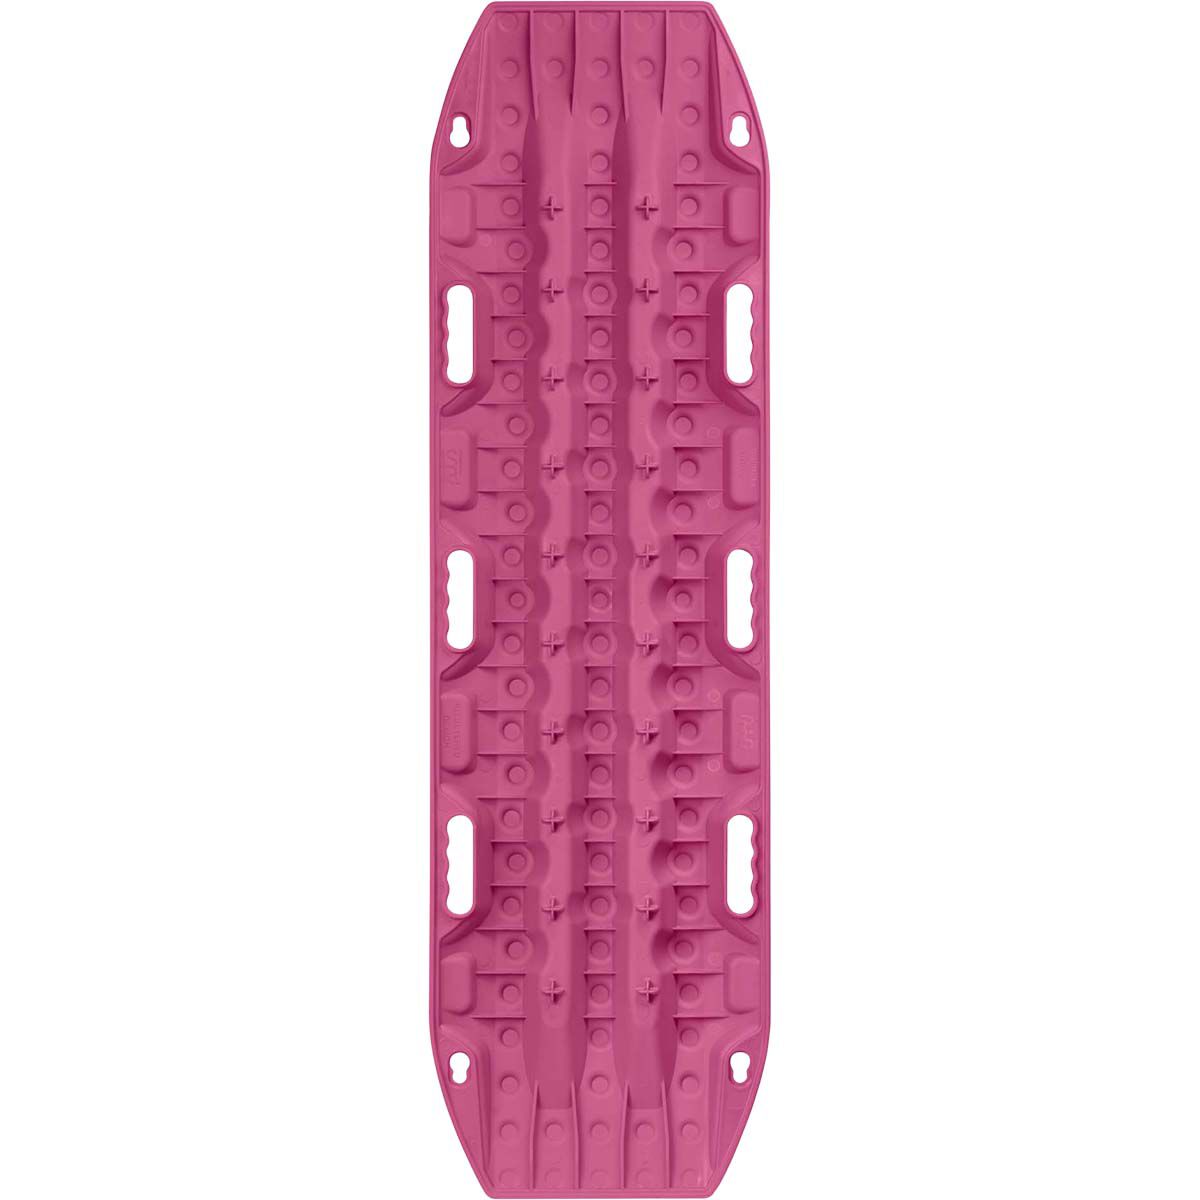 Maxtrax MKII Recovery Boards Pink, , bcf_hi-res